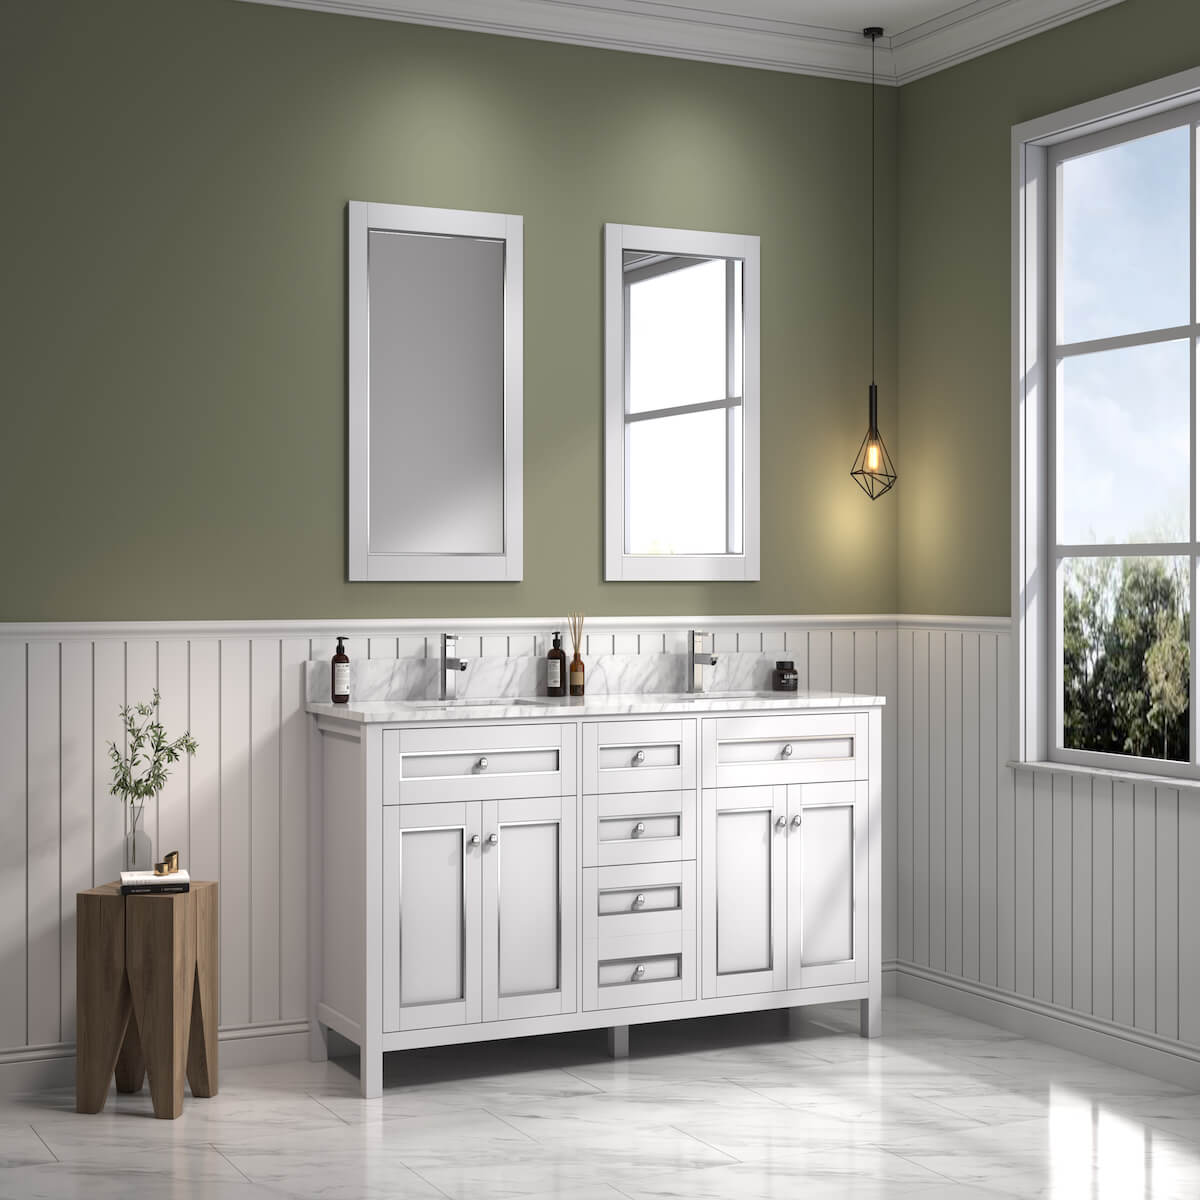 Legion Furniture 72" White Finish Double Sink Cabinet with Carrara White Top In Bathroom Side WV2272-W